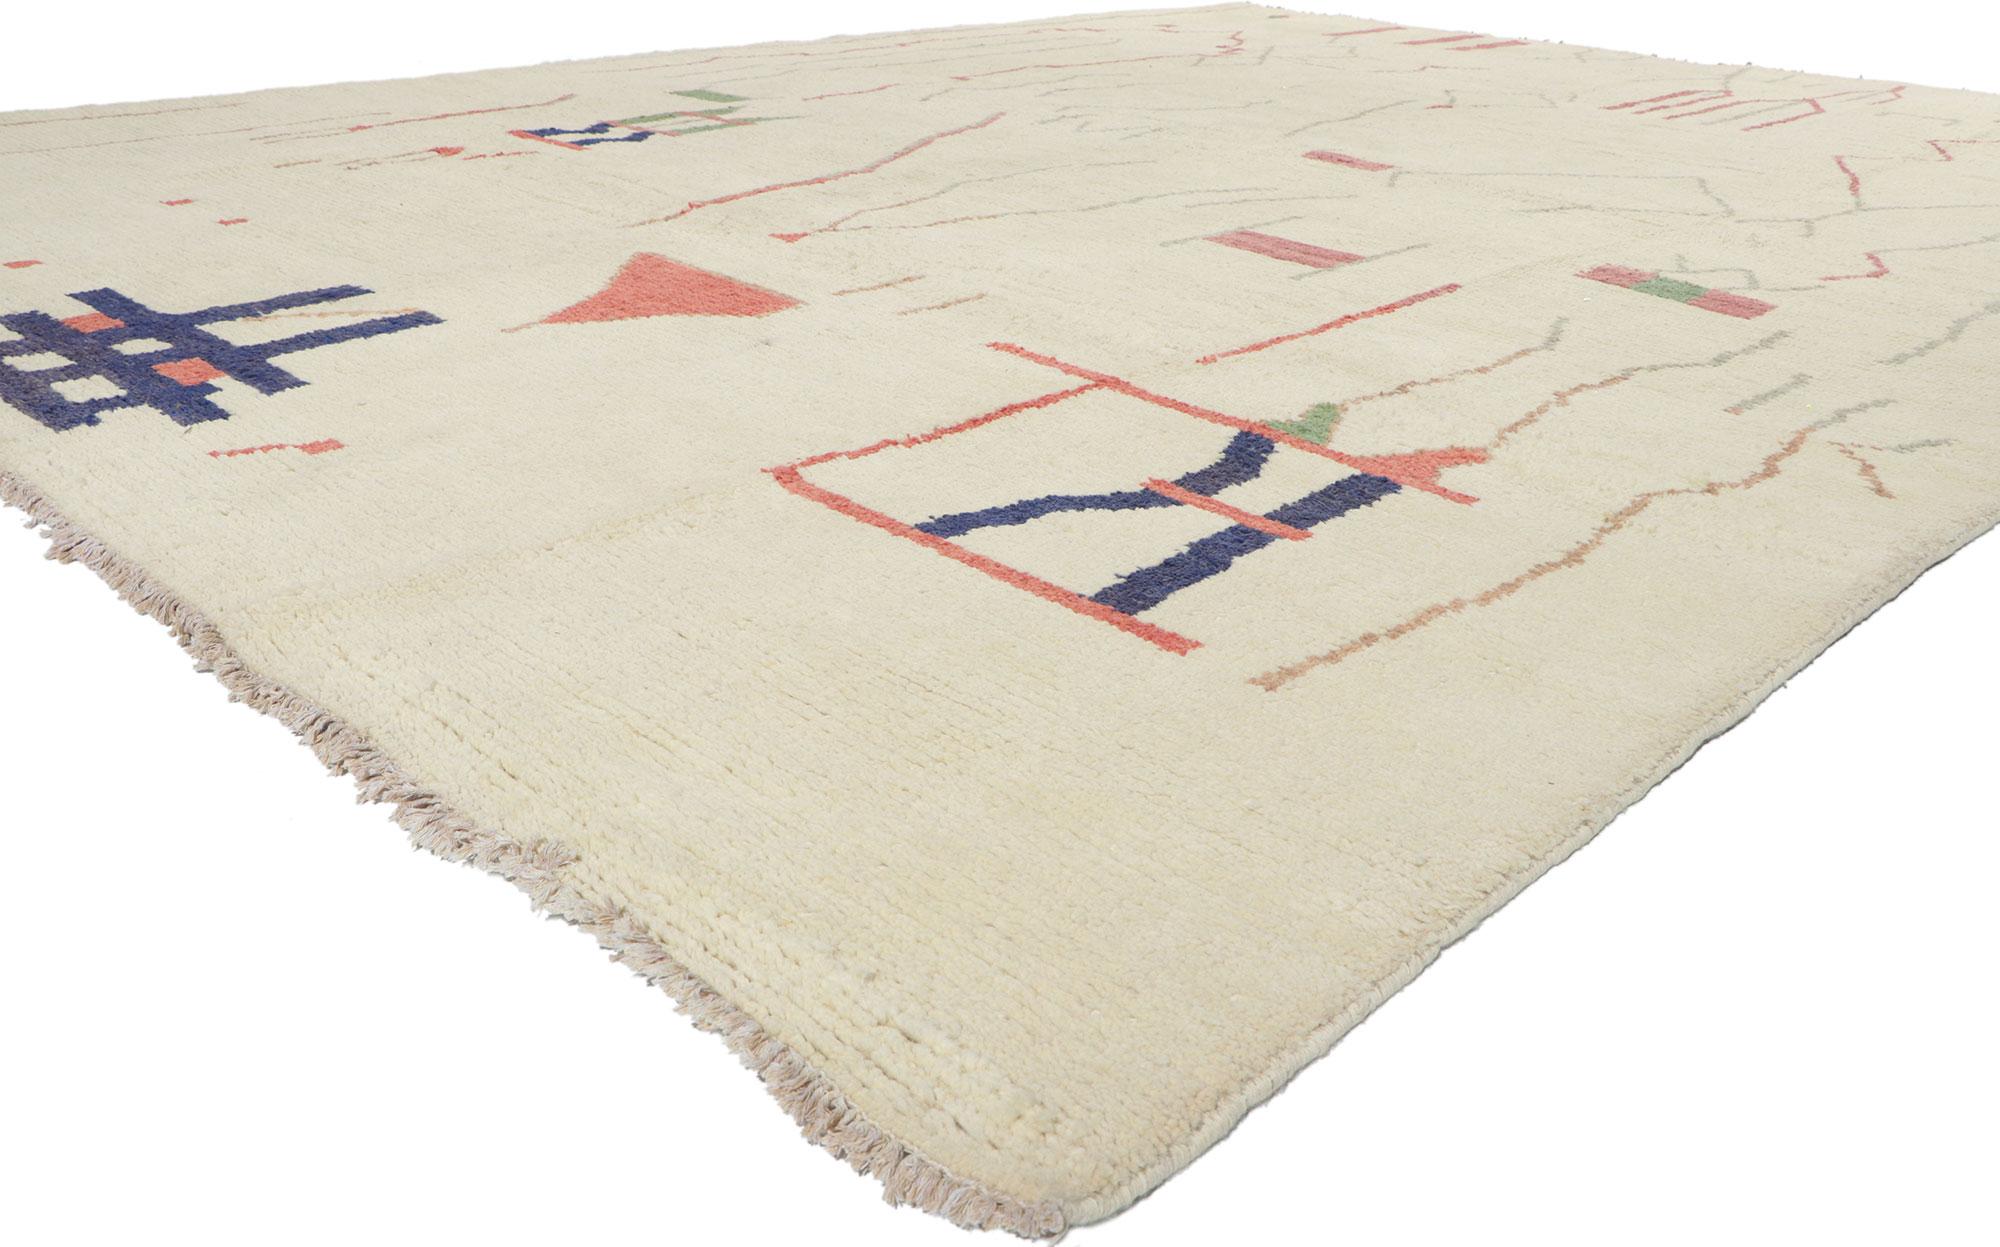 80695 New Contemporary Oversized Moroccan Rug with Modern Brutalist Style 10'02 x 13'10. Recalling the Brutalist, this contemporary oversized Moroccan rug is an amalgam of International style and the very definition of celebrated and spirited high